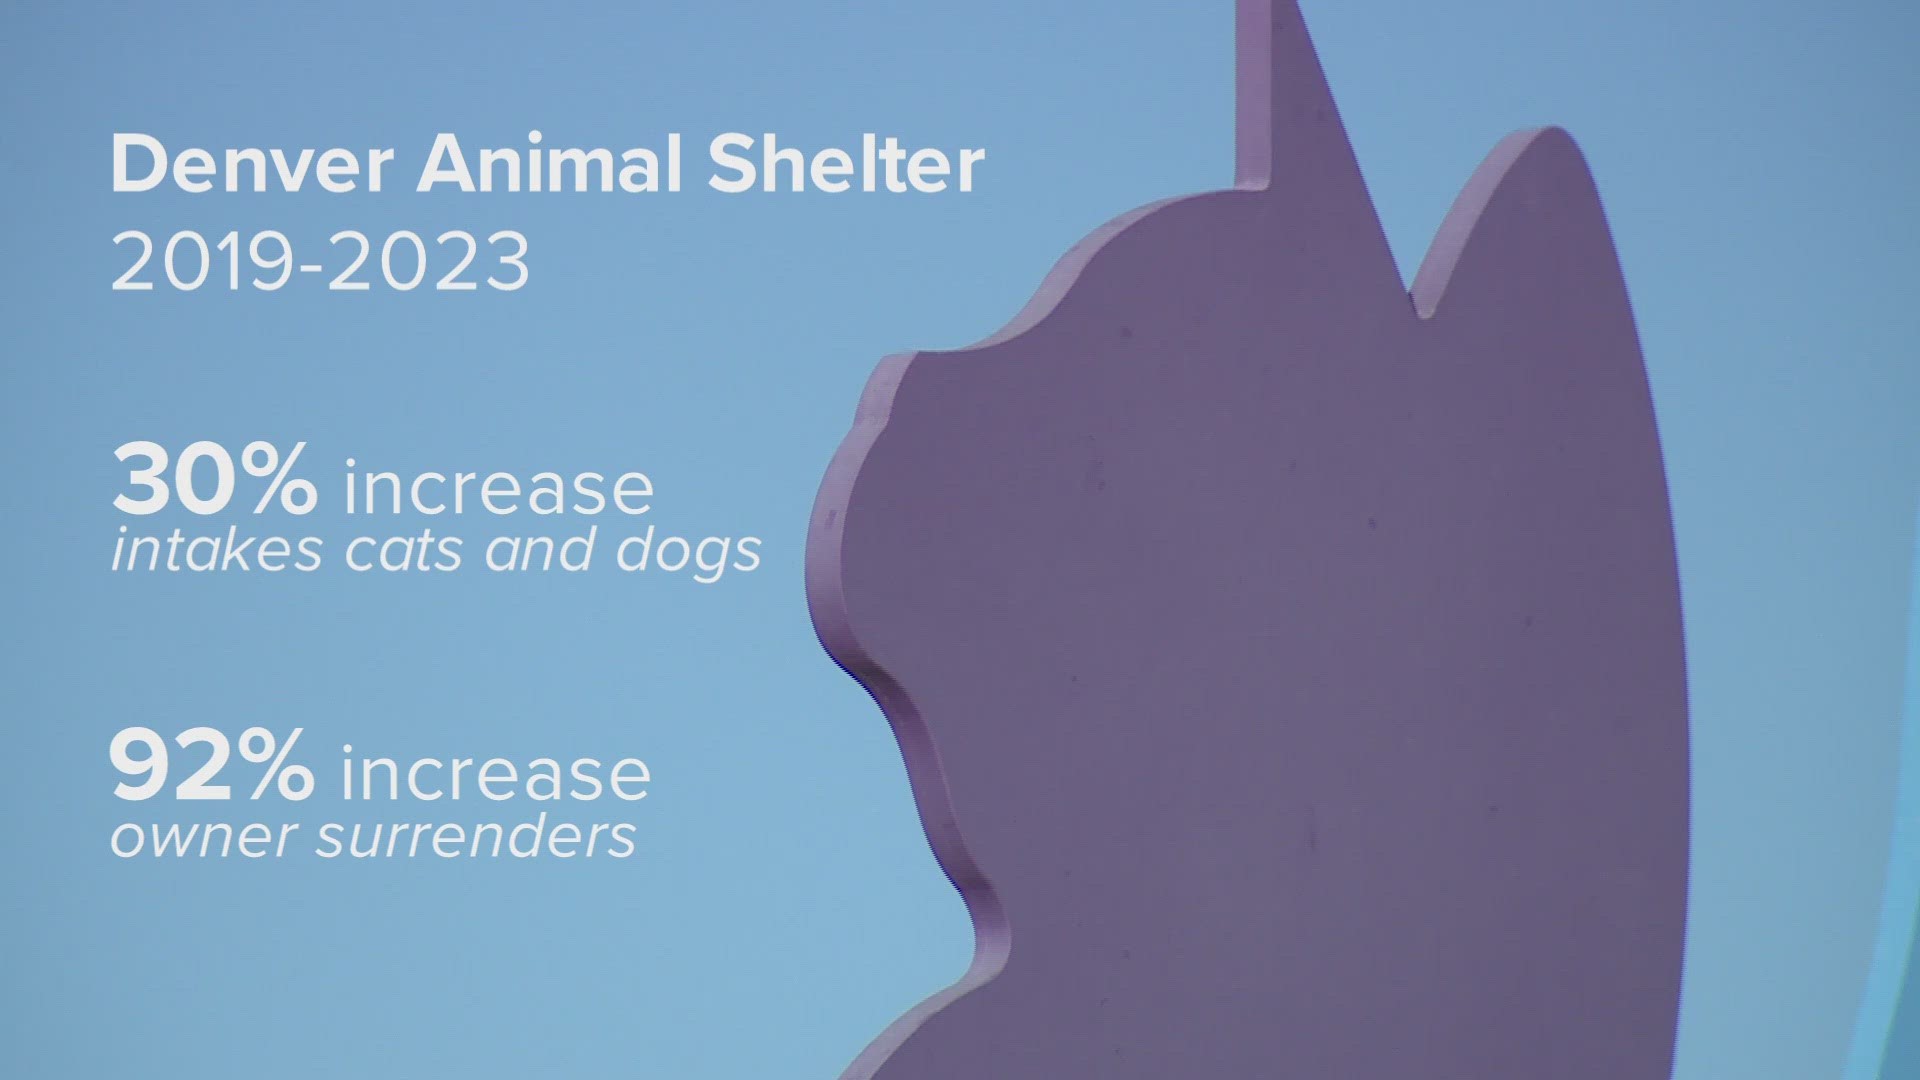 Denver Animal Shelter has seen a 30% increase in the intake of animals, and a 92% increase in owner surrenders from 2019 to 2023.